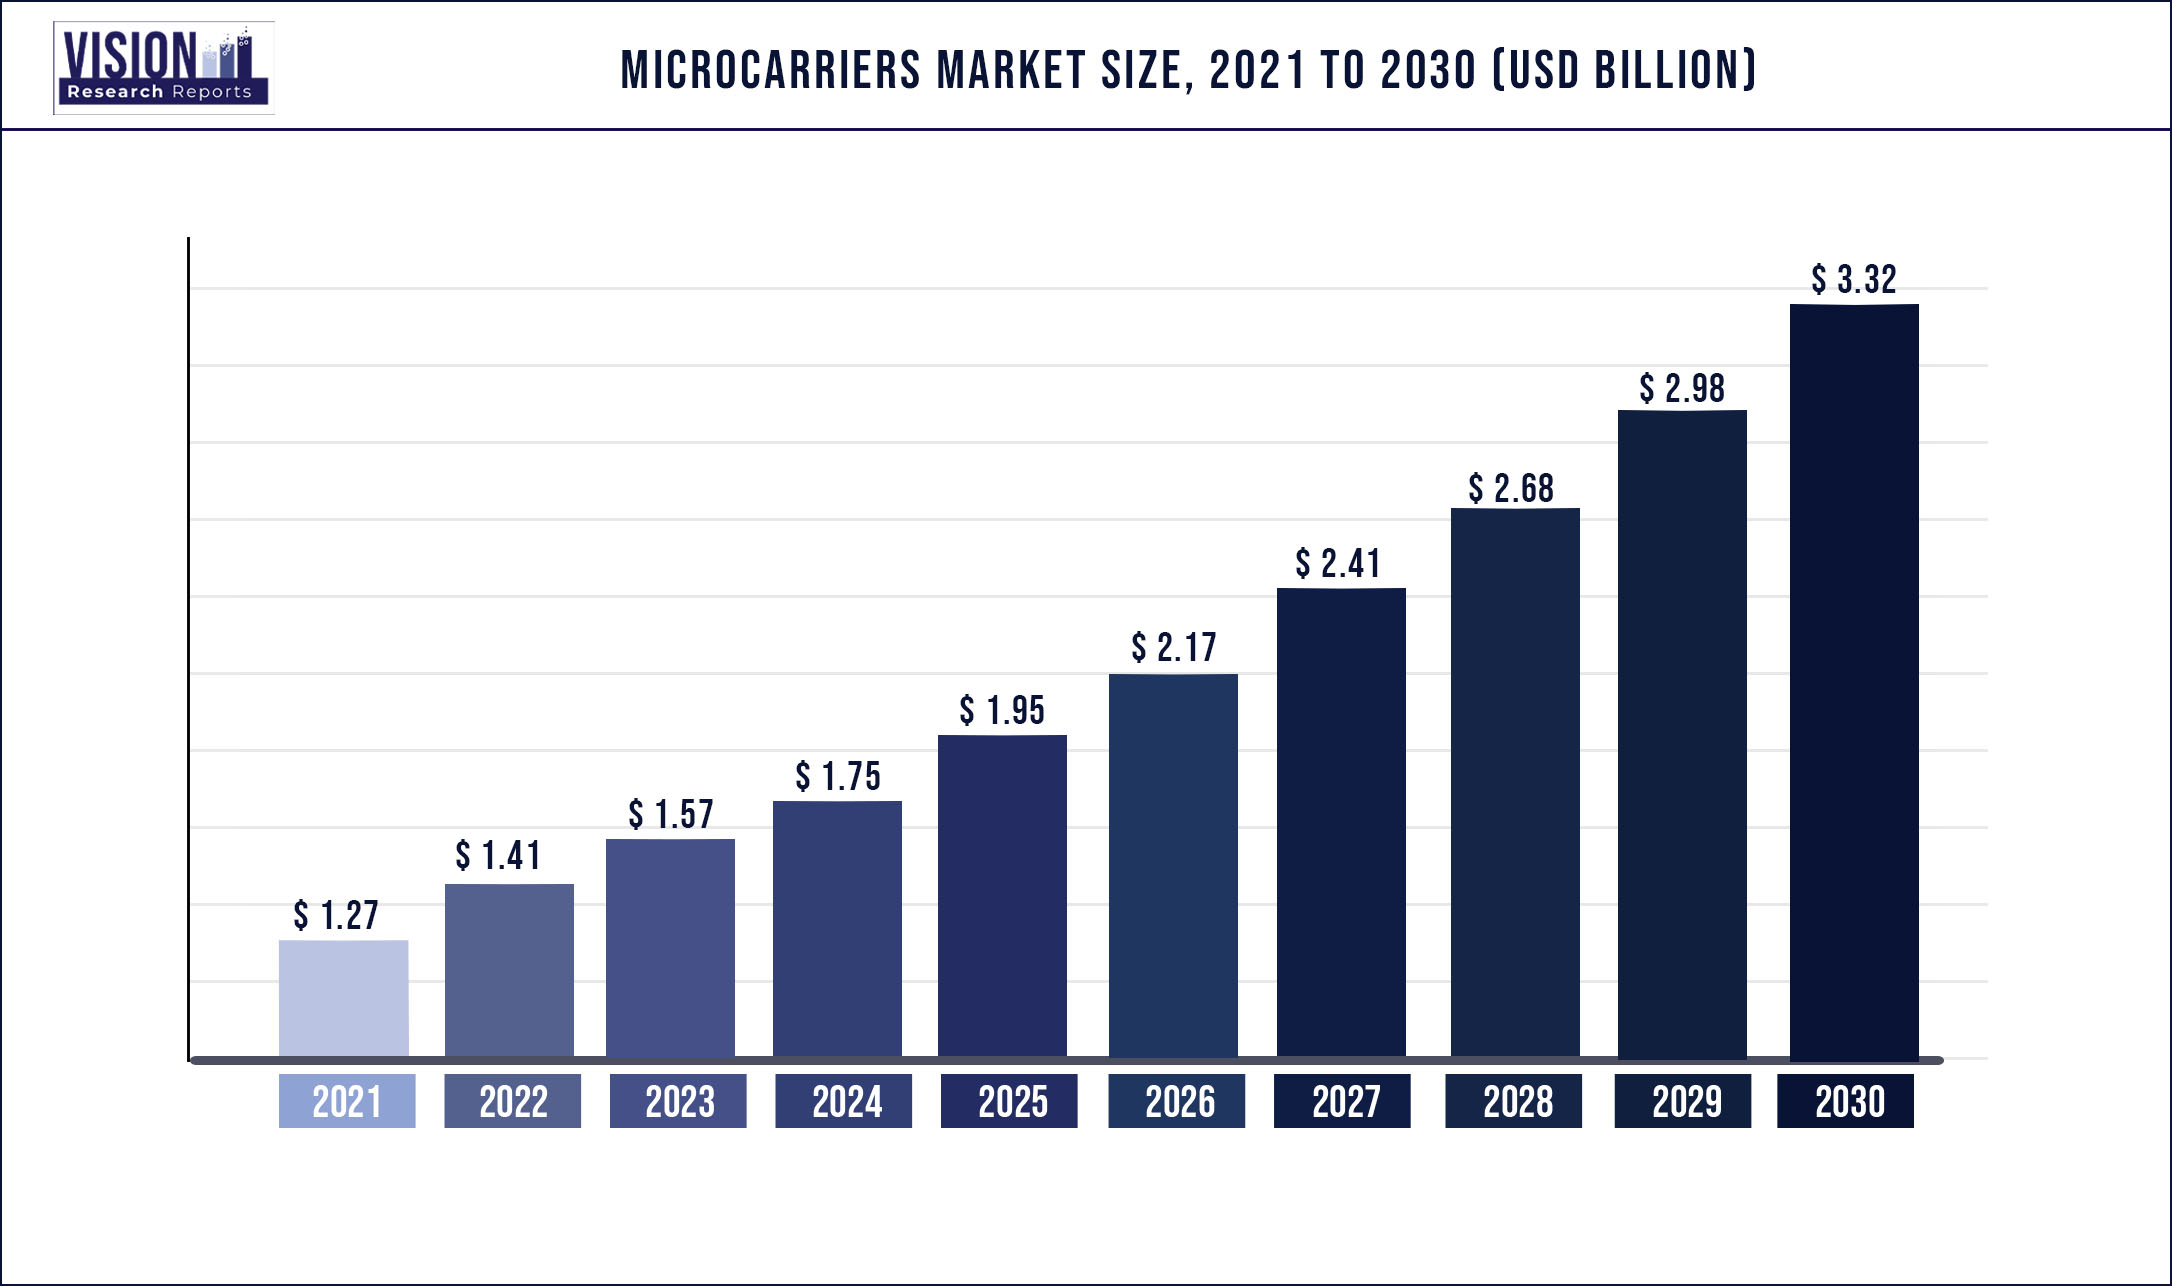 Microcarriers Market Size 2021 to 2030